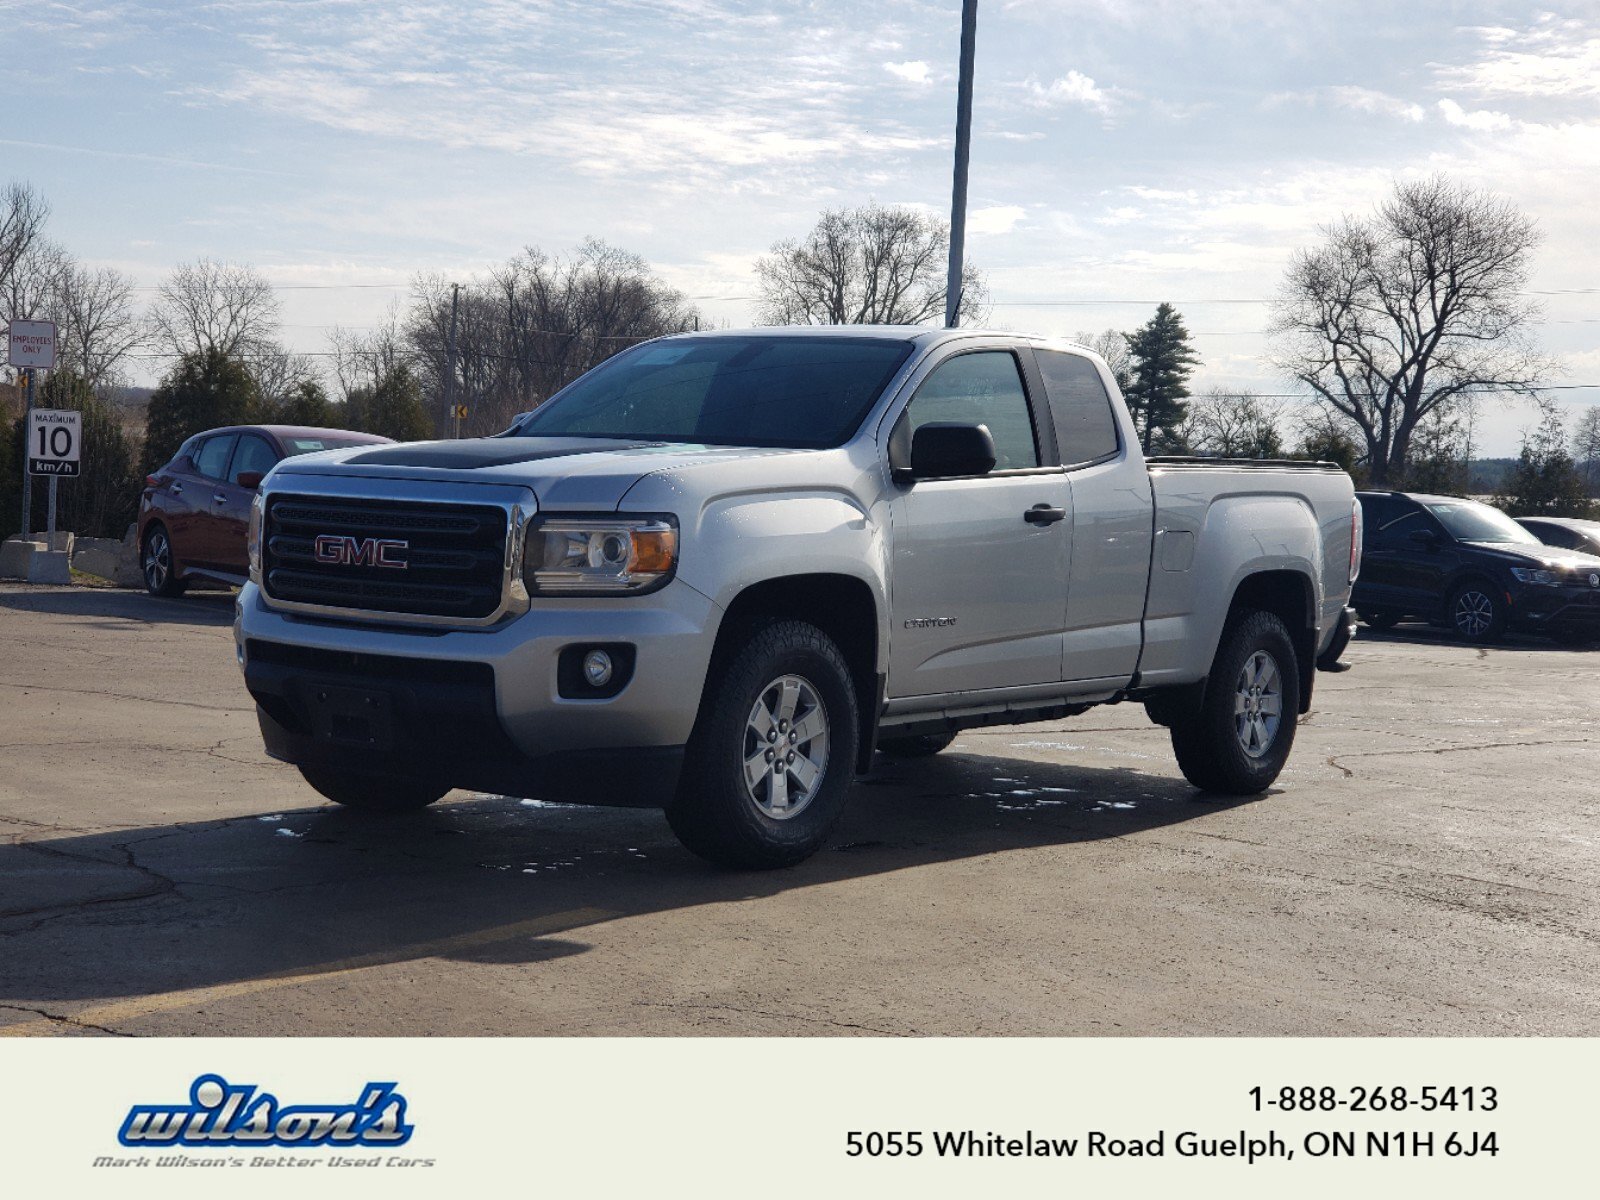 2017 GMC Canyon 2WD Extended Cab - Spray In Bedliner, 16 alloys & 